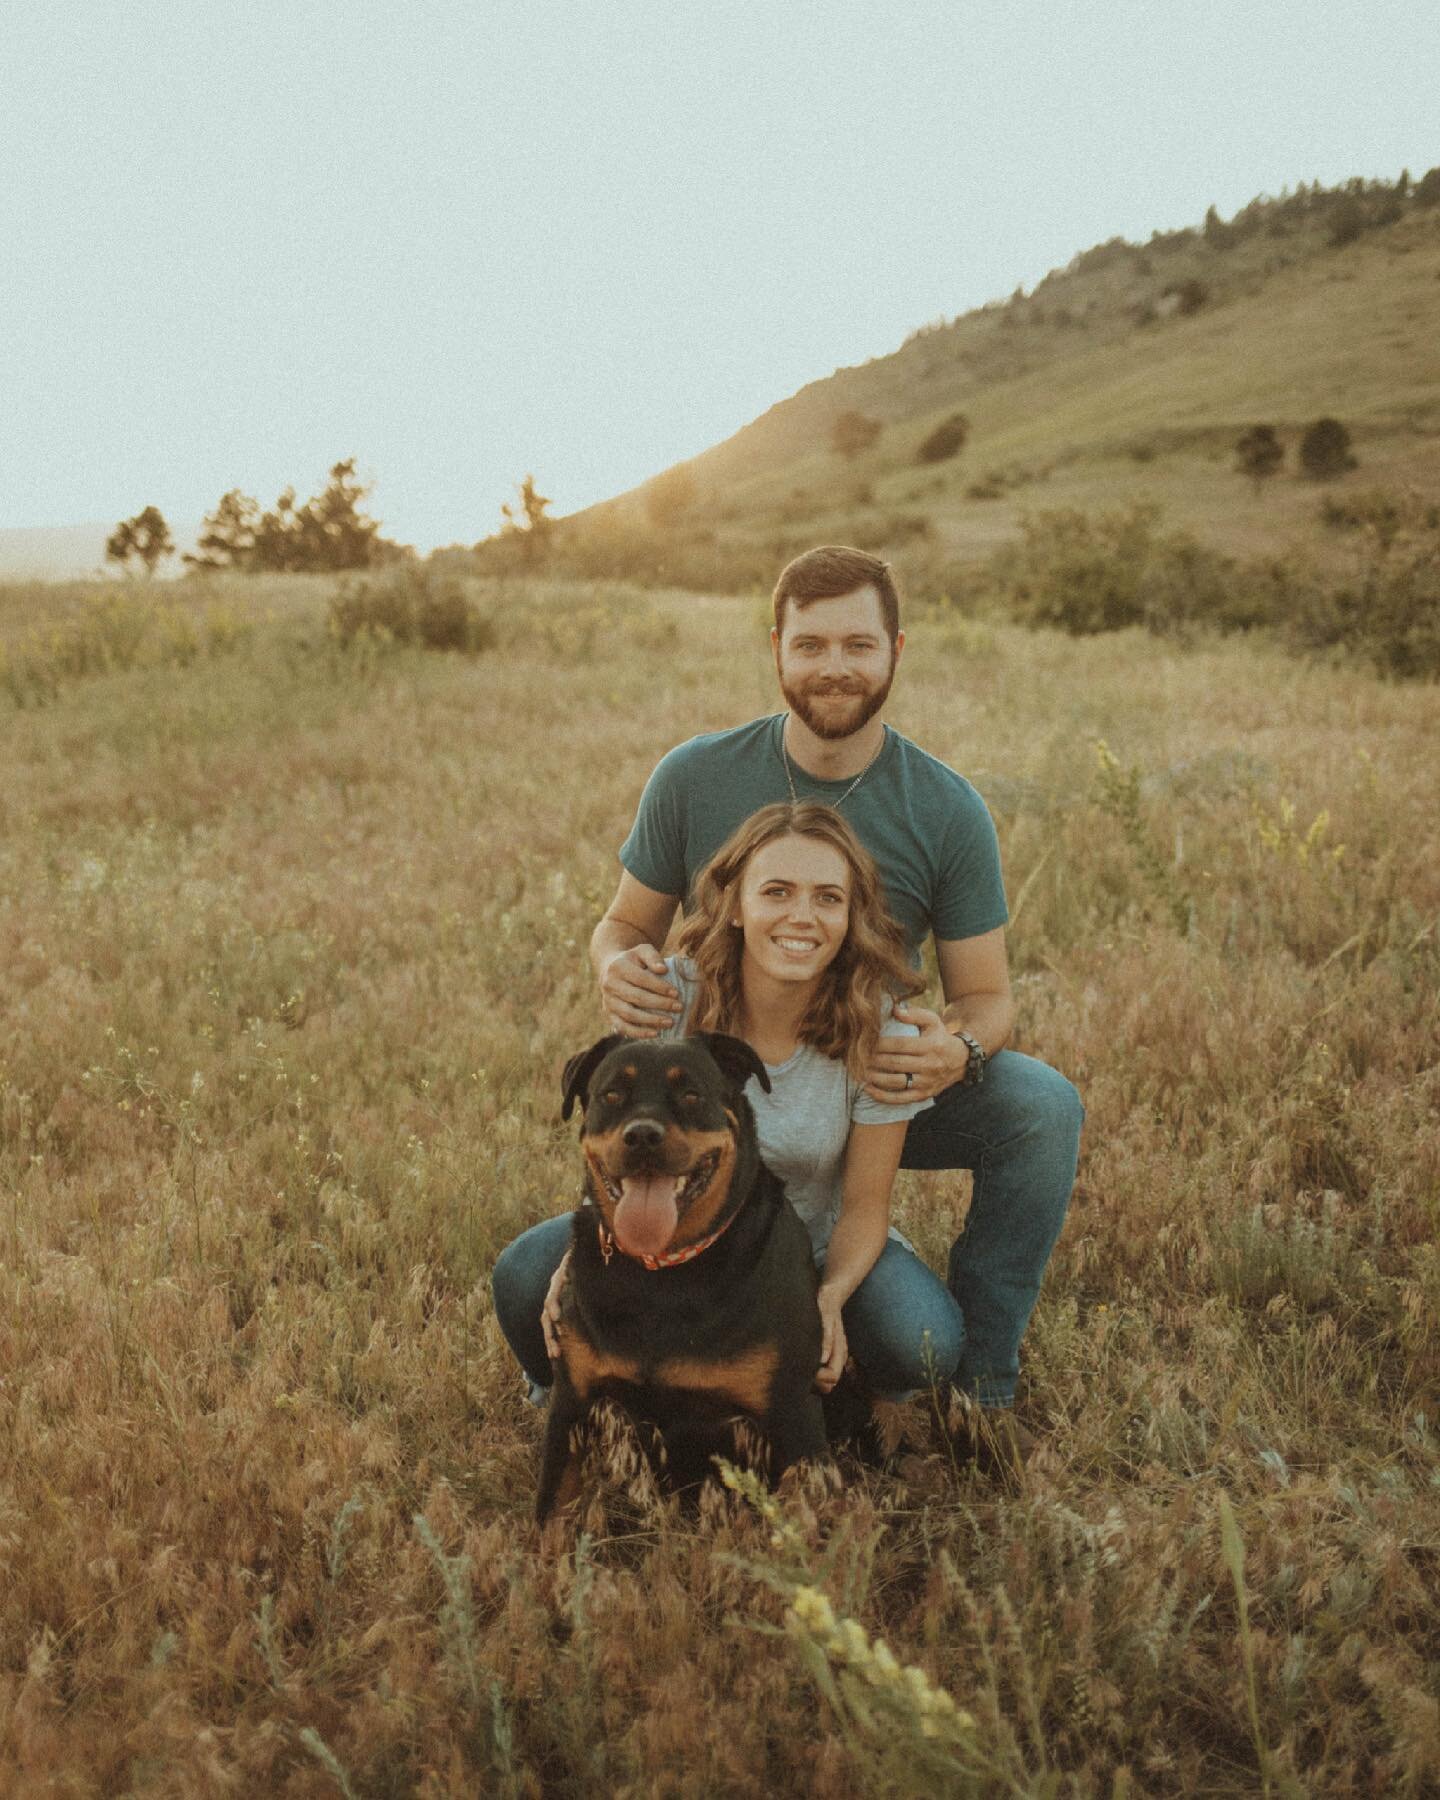 Colorado adventures are always fun especially when you add a sweet pup into the plans! Thanks for spending the evening with me and for all the laughs! September will be here before we know it and you two will be saying, &ldquo;I Do!&rdquo;